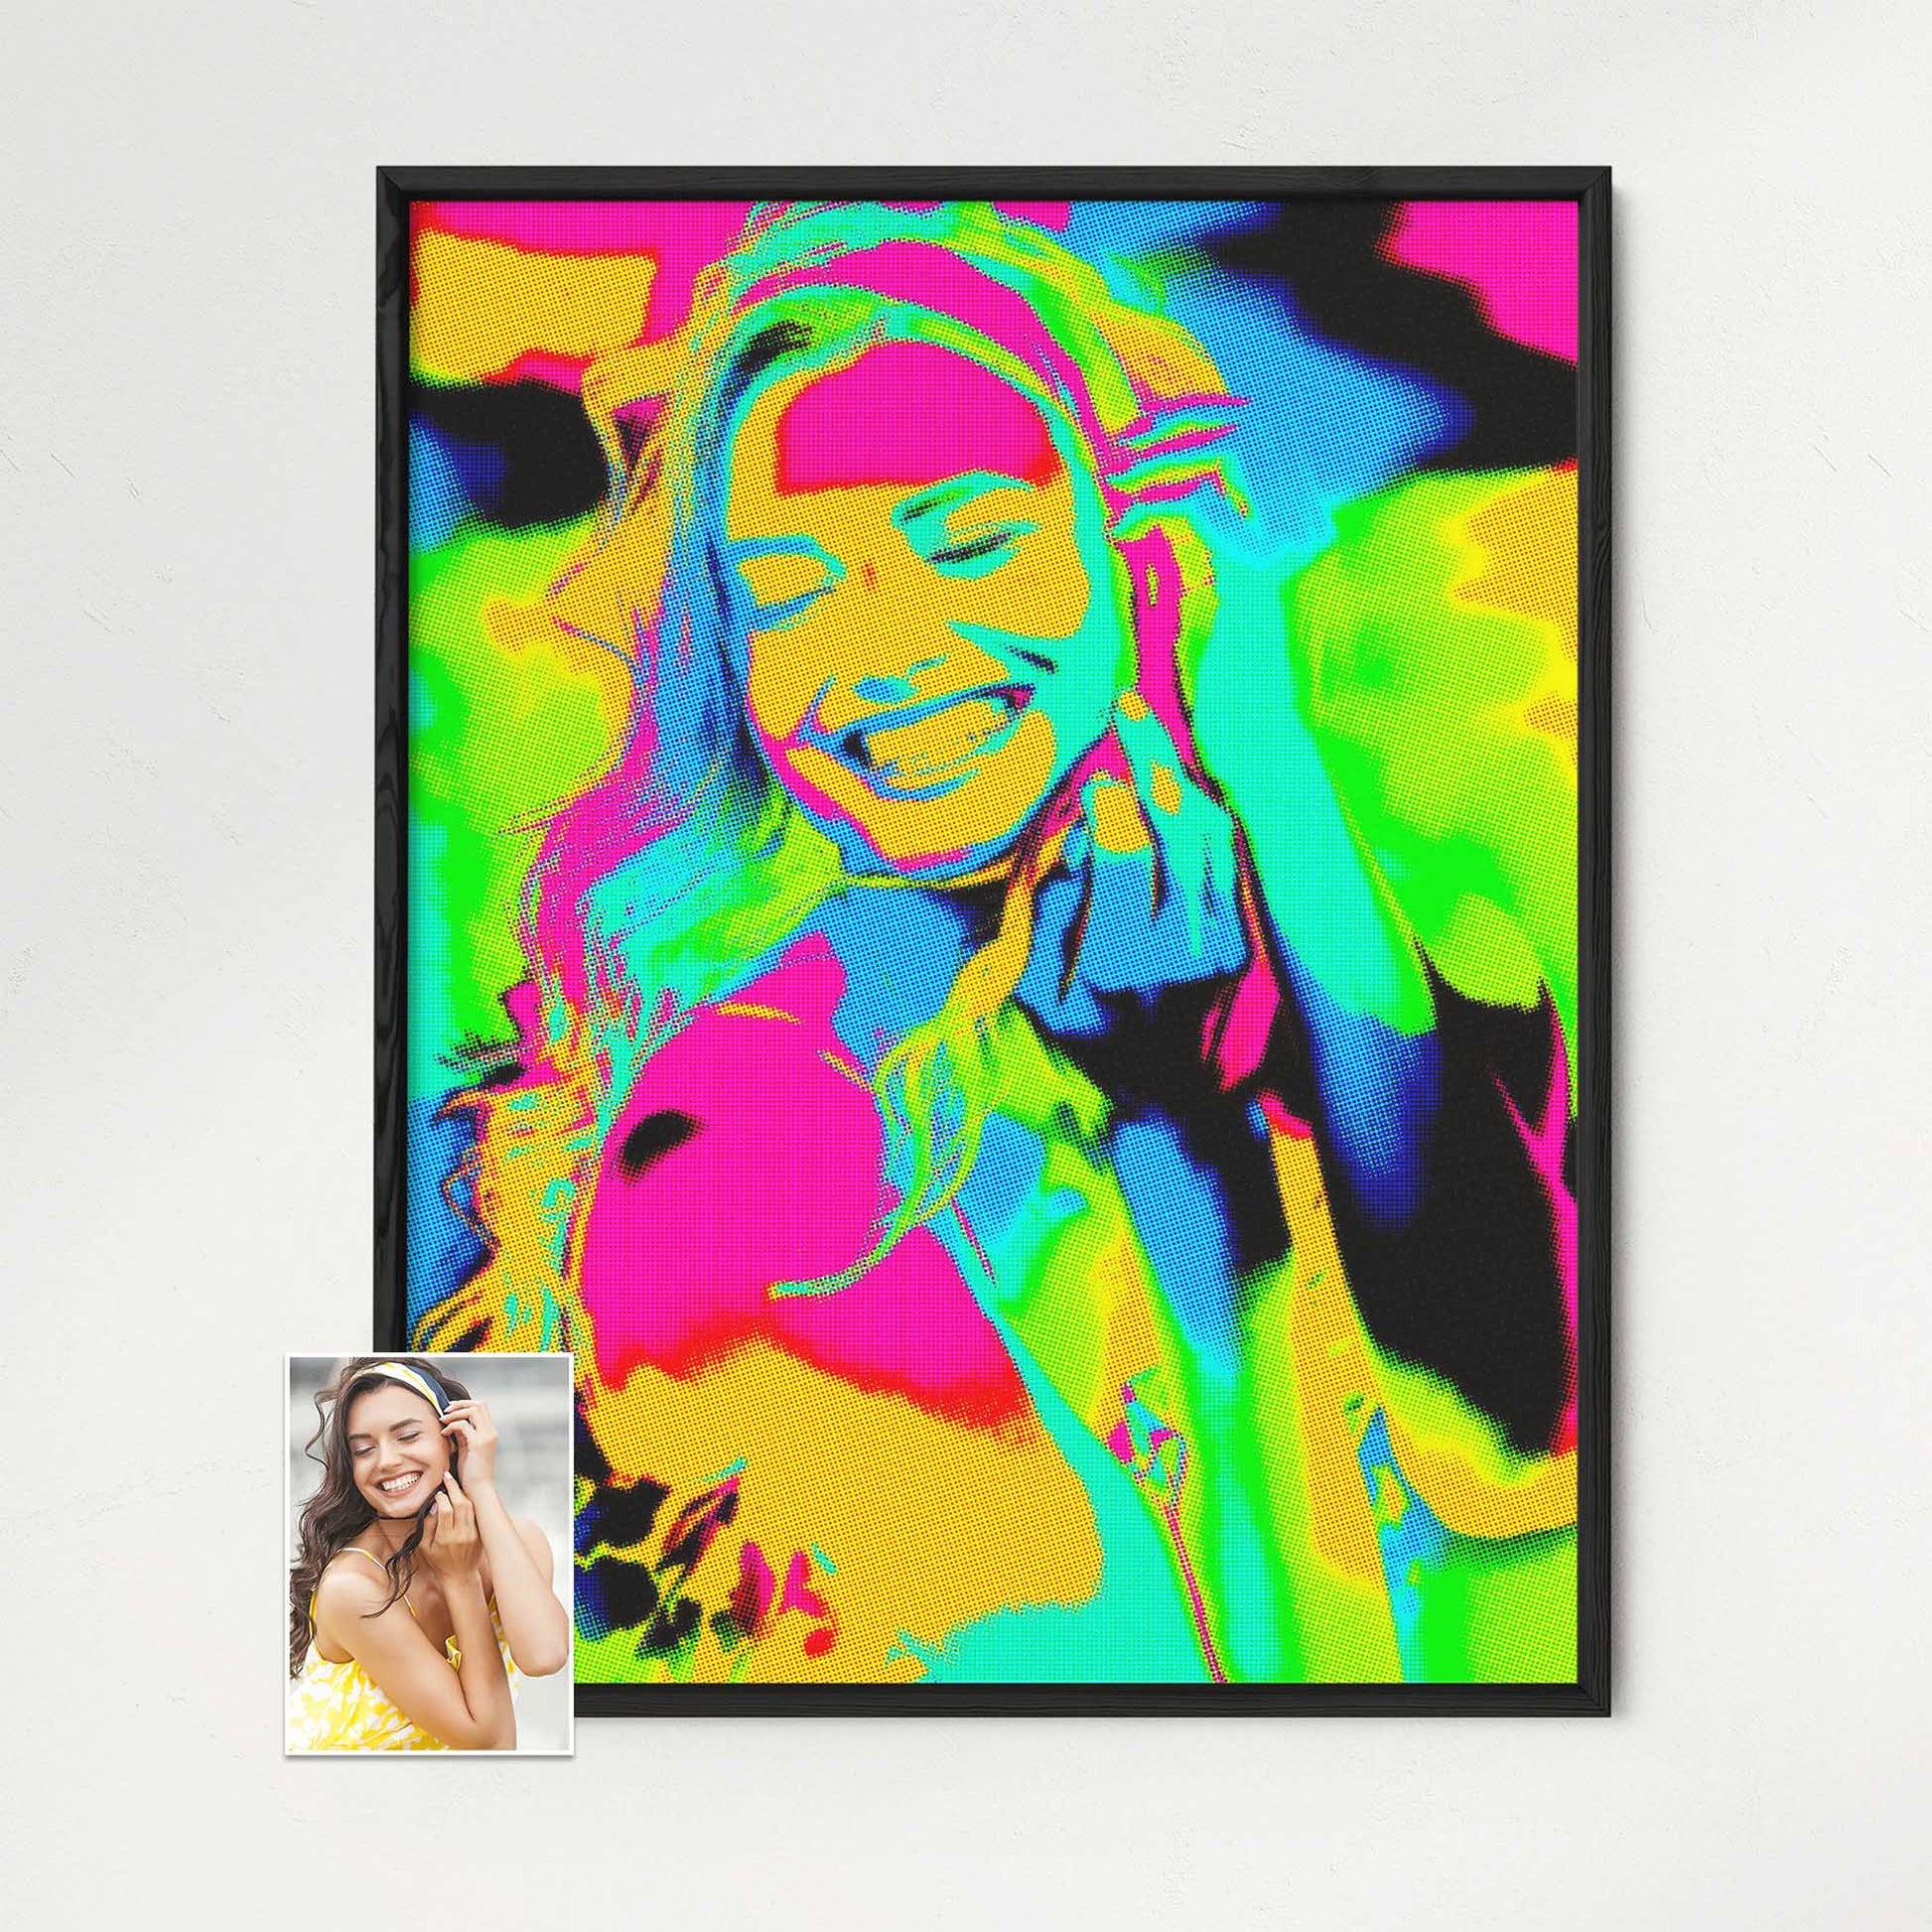 Immerse yourself in the world of pop art with our Personalised Pop Art Framed Print. Created through printing from photo, it showcases a captivating pop art style with a halftone effect. The bold and expressive colors of pink, orange, green